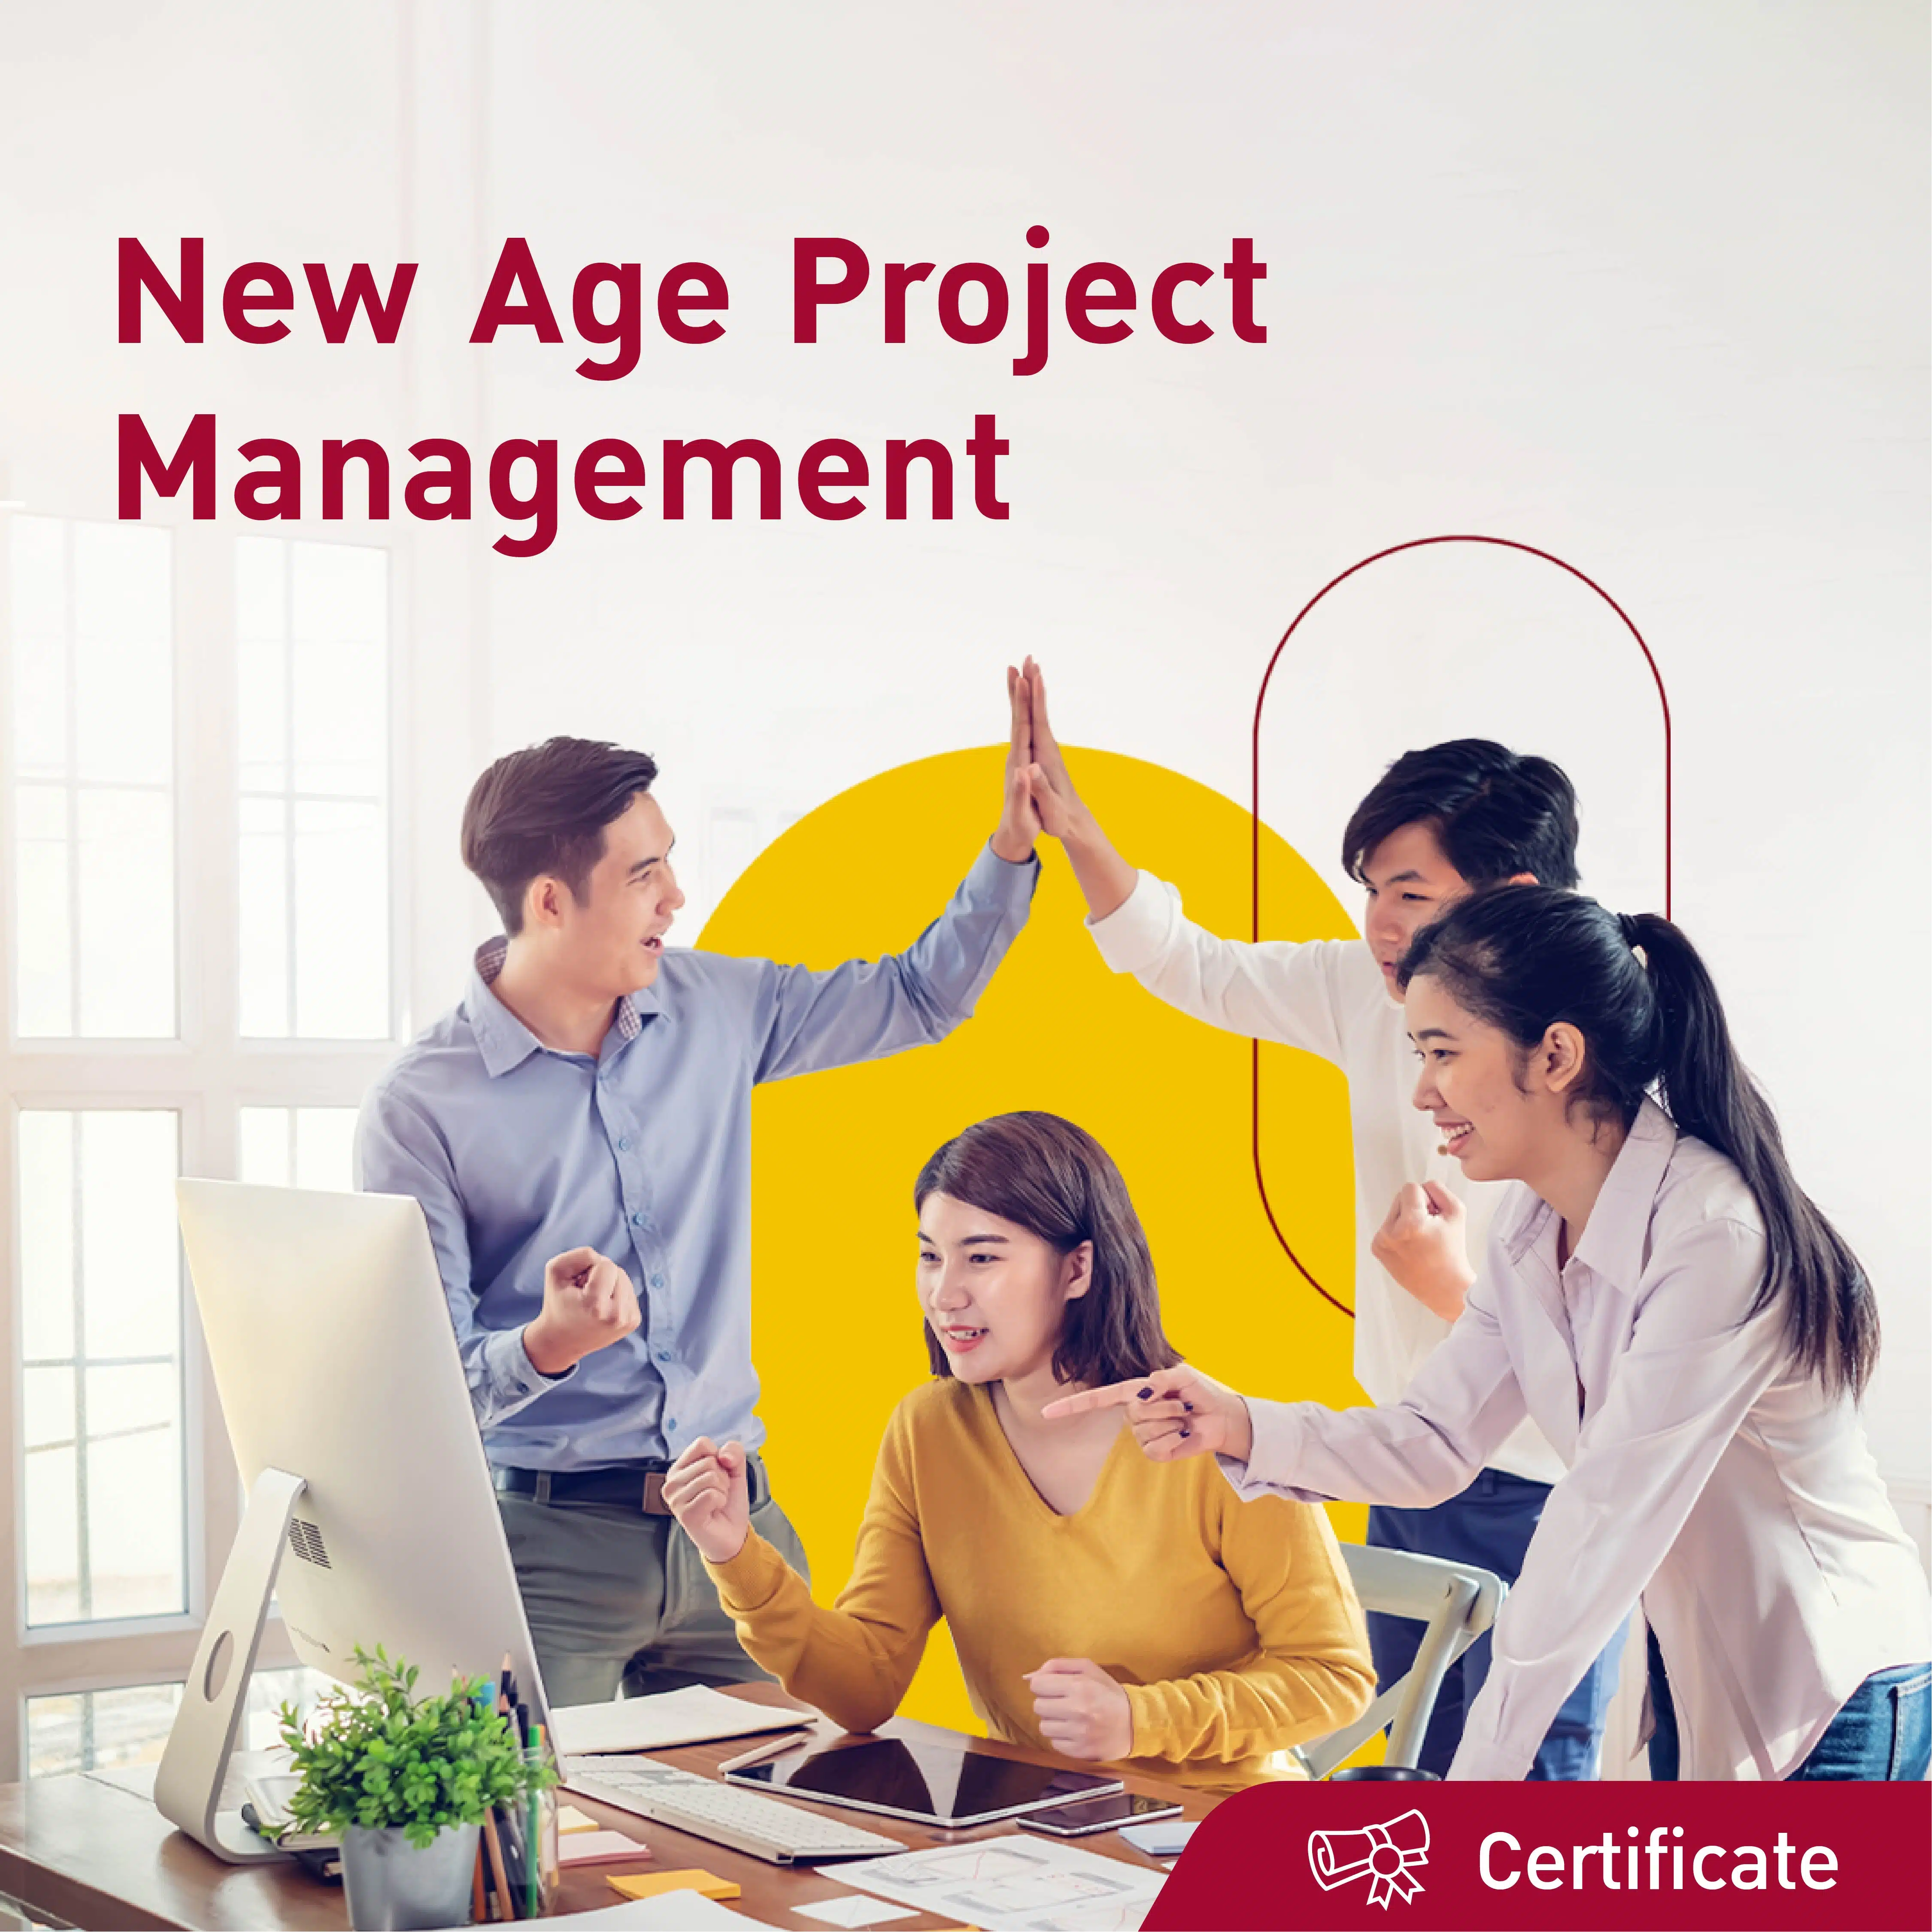 AW_Jobs Base Learning_New Age Project Management_1080x1080